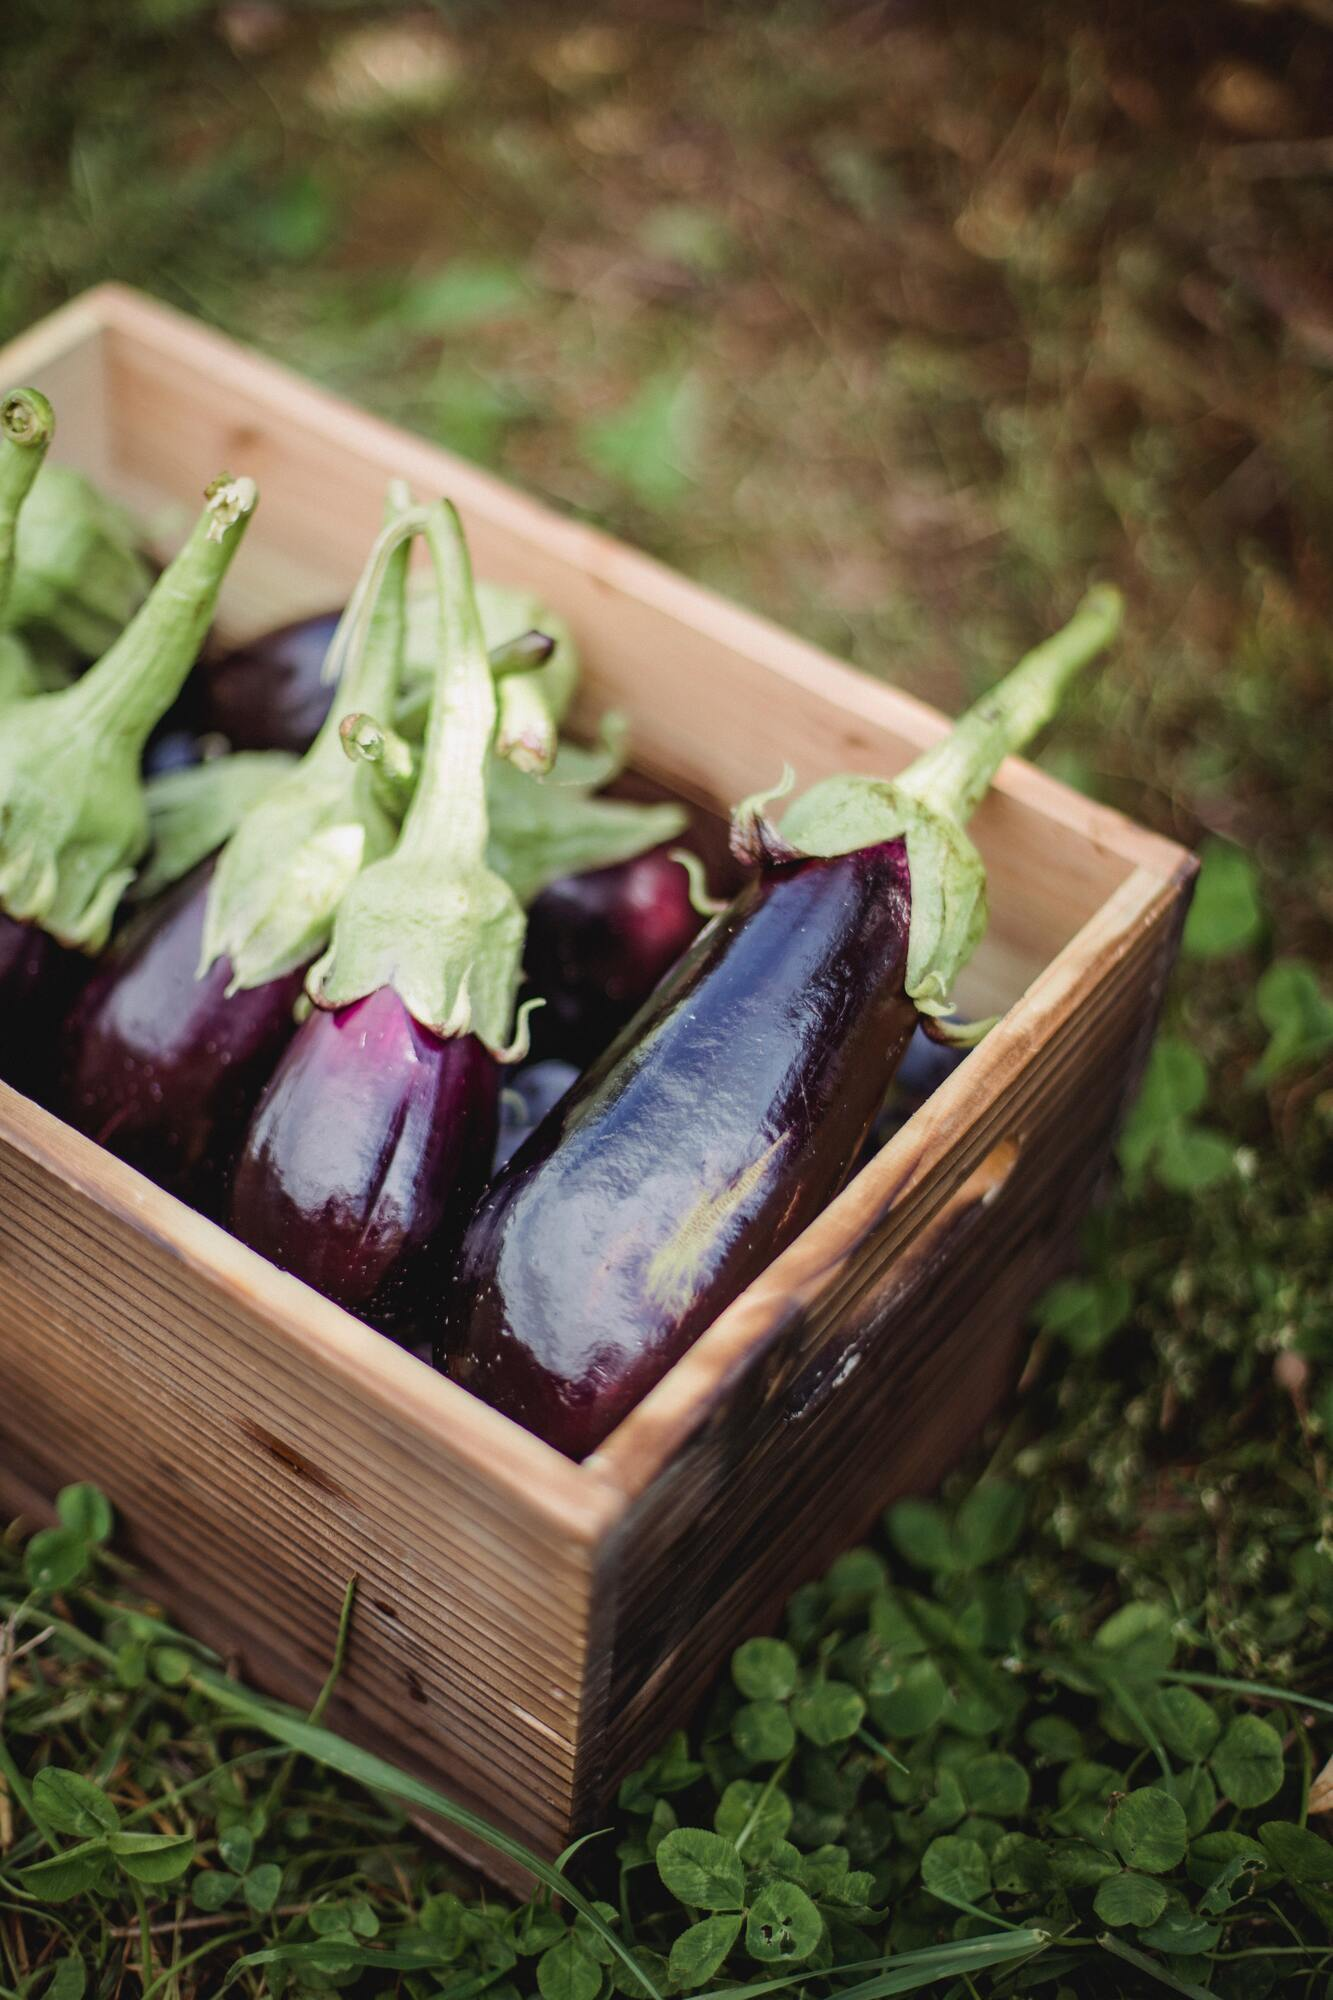 Pickled eggplants for a quick meal that can be eaten the next day